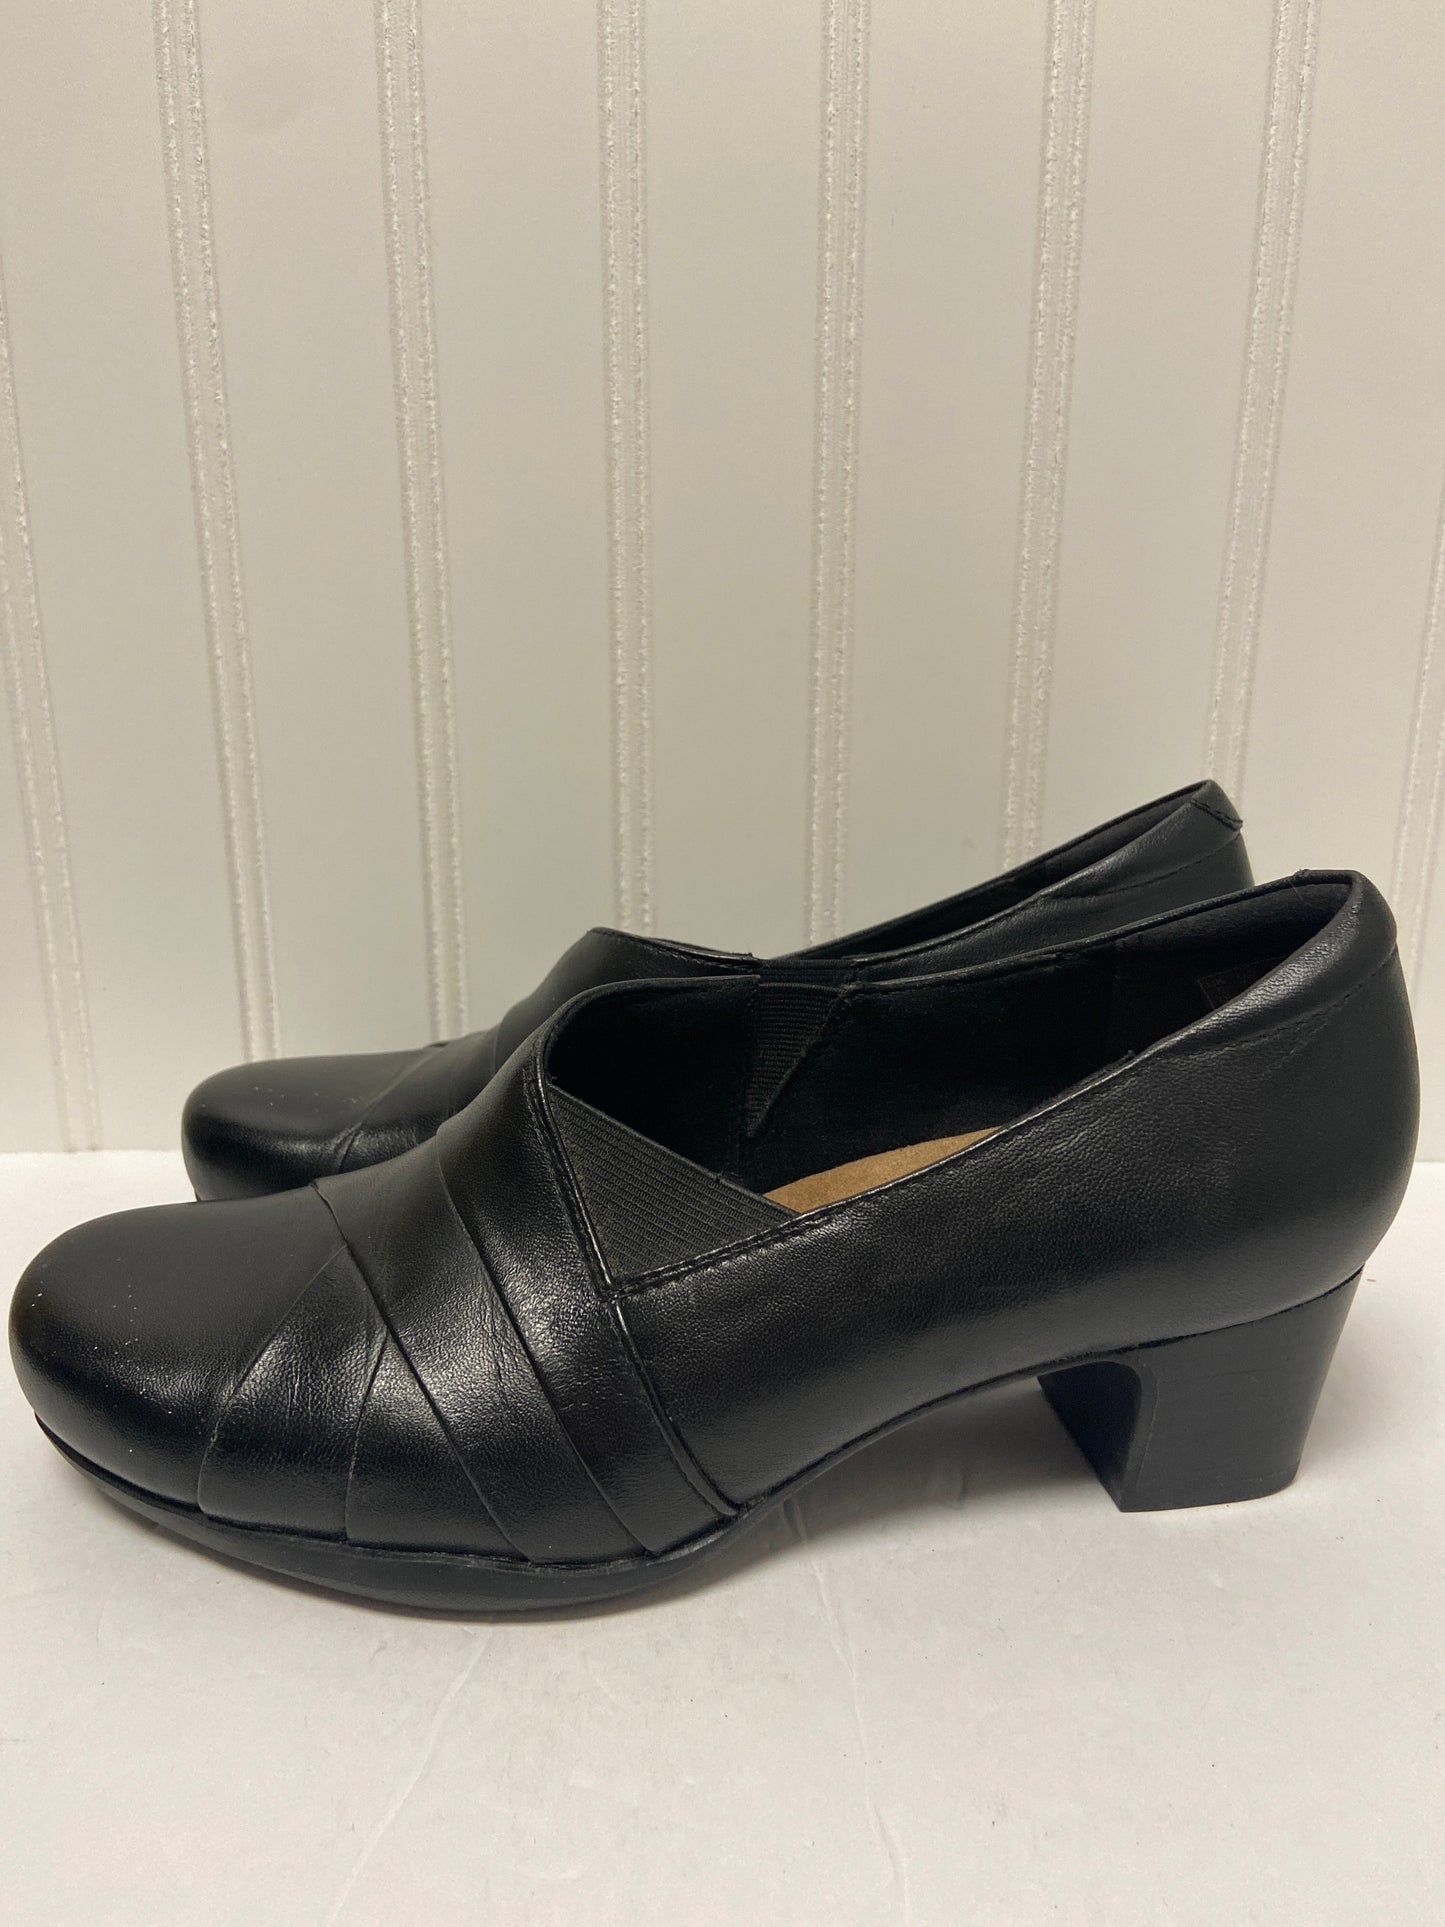 Shoes Heels Block By Clarks  Size: 7.5